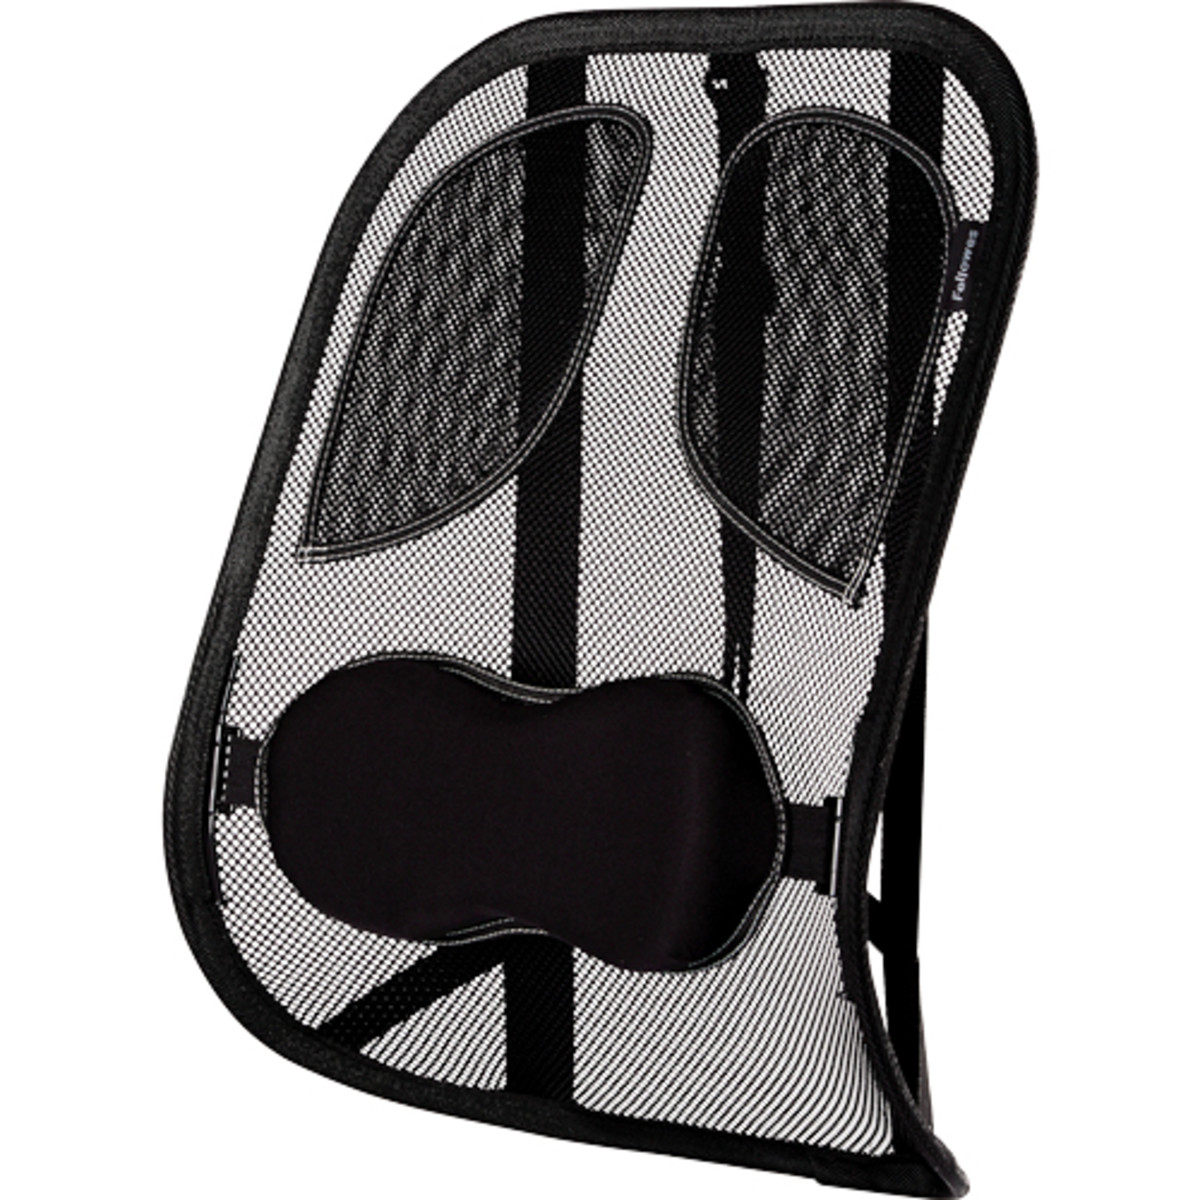 Pro Series Mesh Back Support